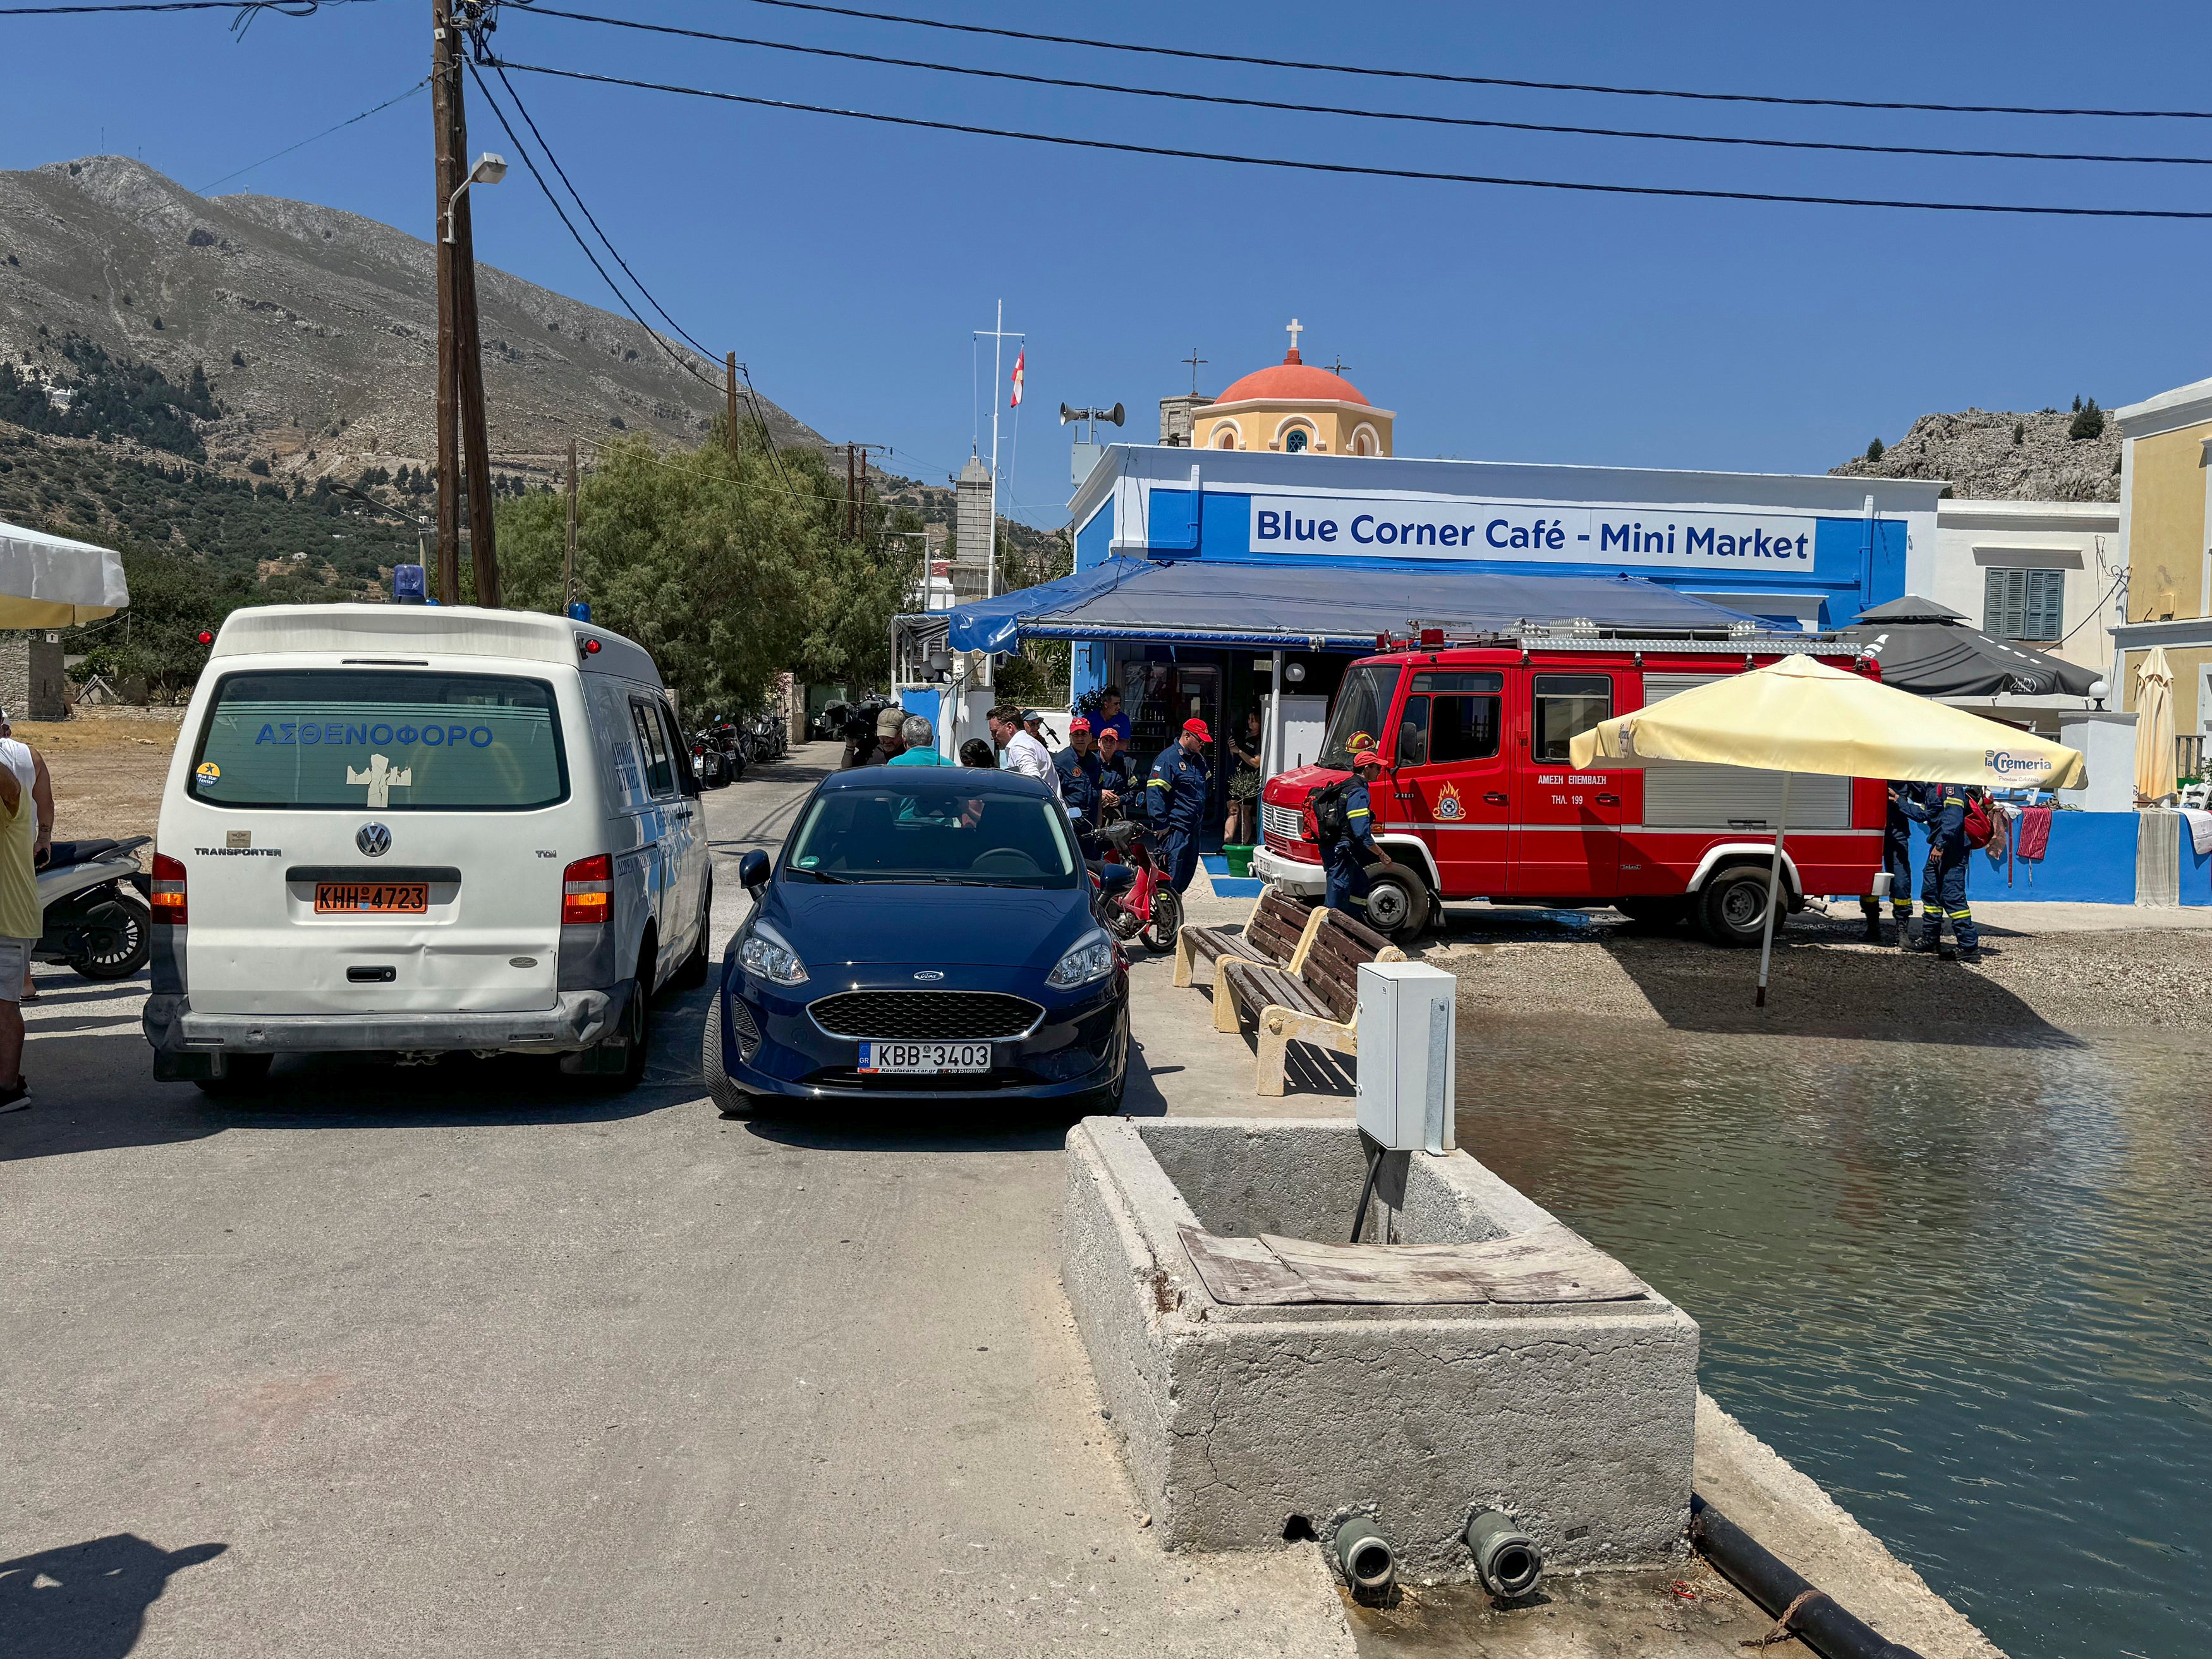 A view of an ambulance and a fire brigade van on a beachfront of Symi island in Greece